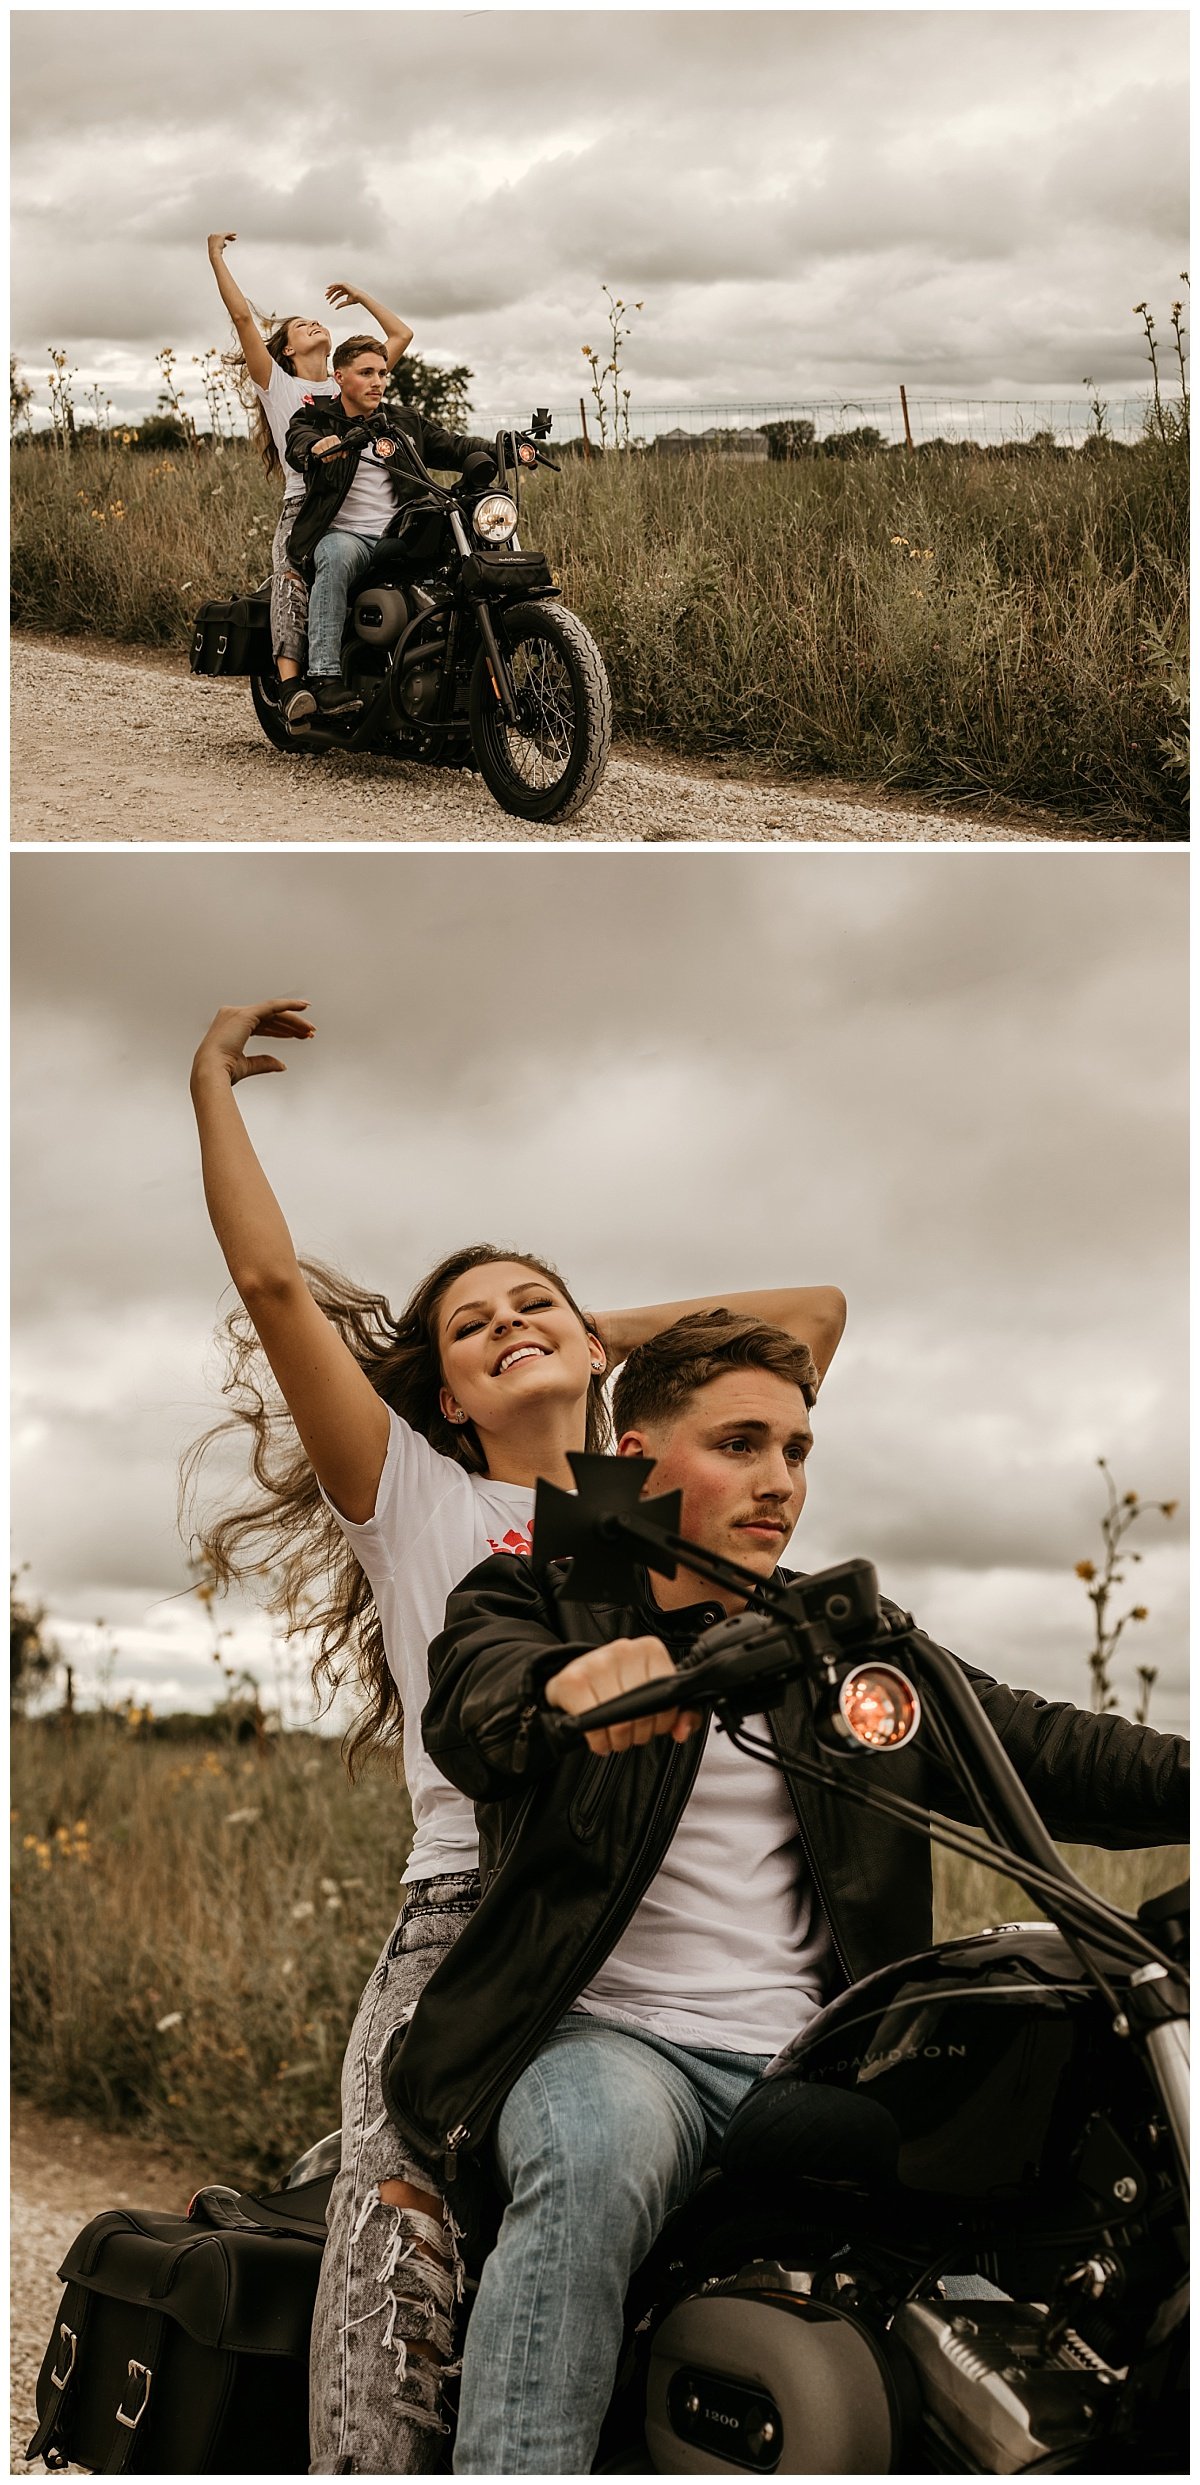 motorcycle+session+_+adventure+session+_+engagement+session+_+motorcycle+photos+_+lana+del+rey+_+ride+or+die+_+adventurous+couple+_+kansas+city+photographer+_+kansas+city+photography (4).jpeg